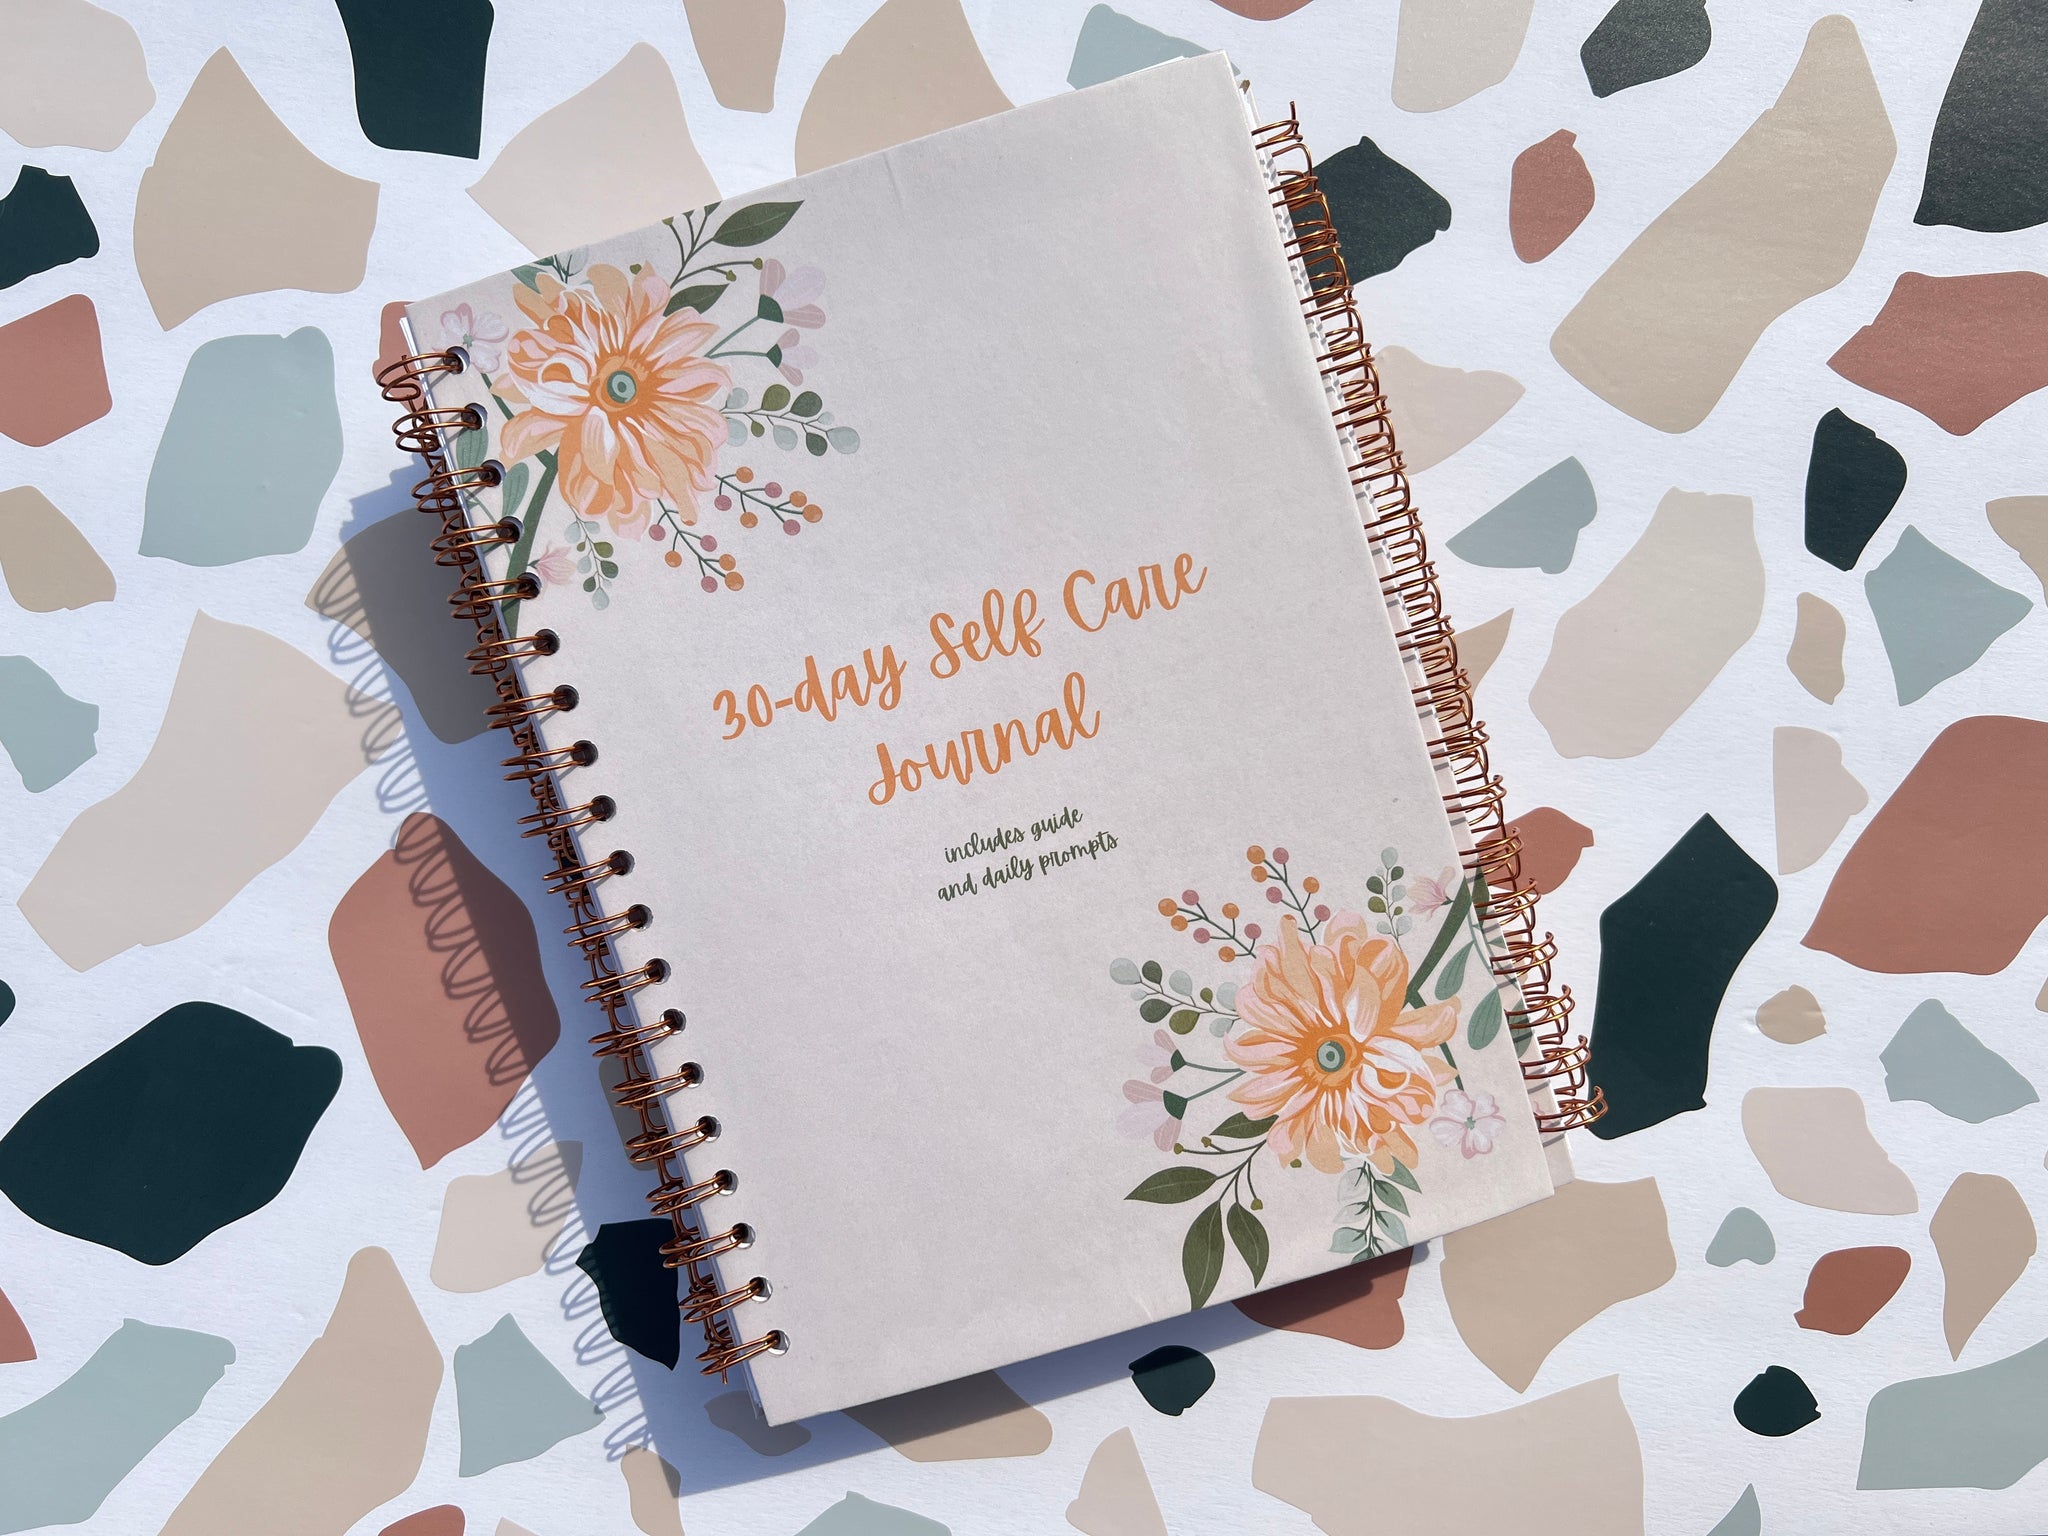 Self-Care Journal and Prompts